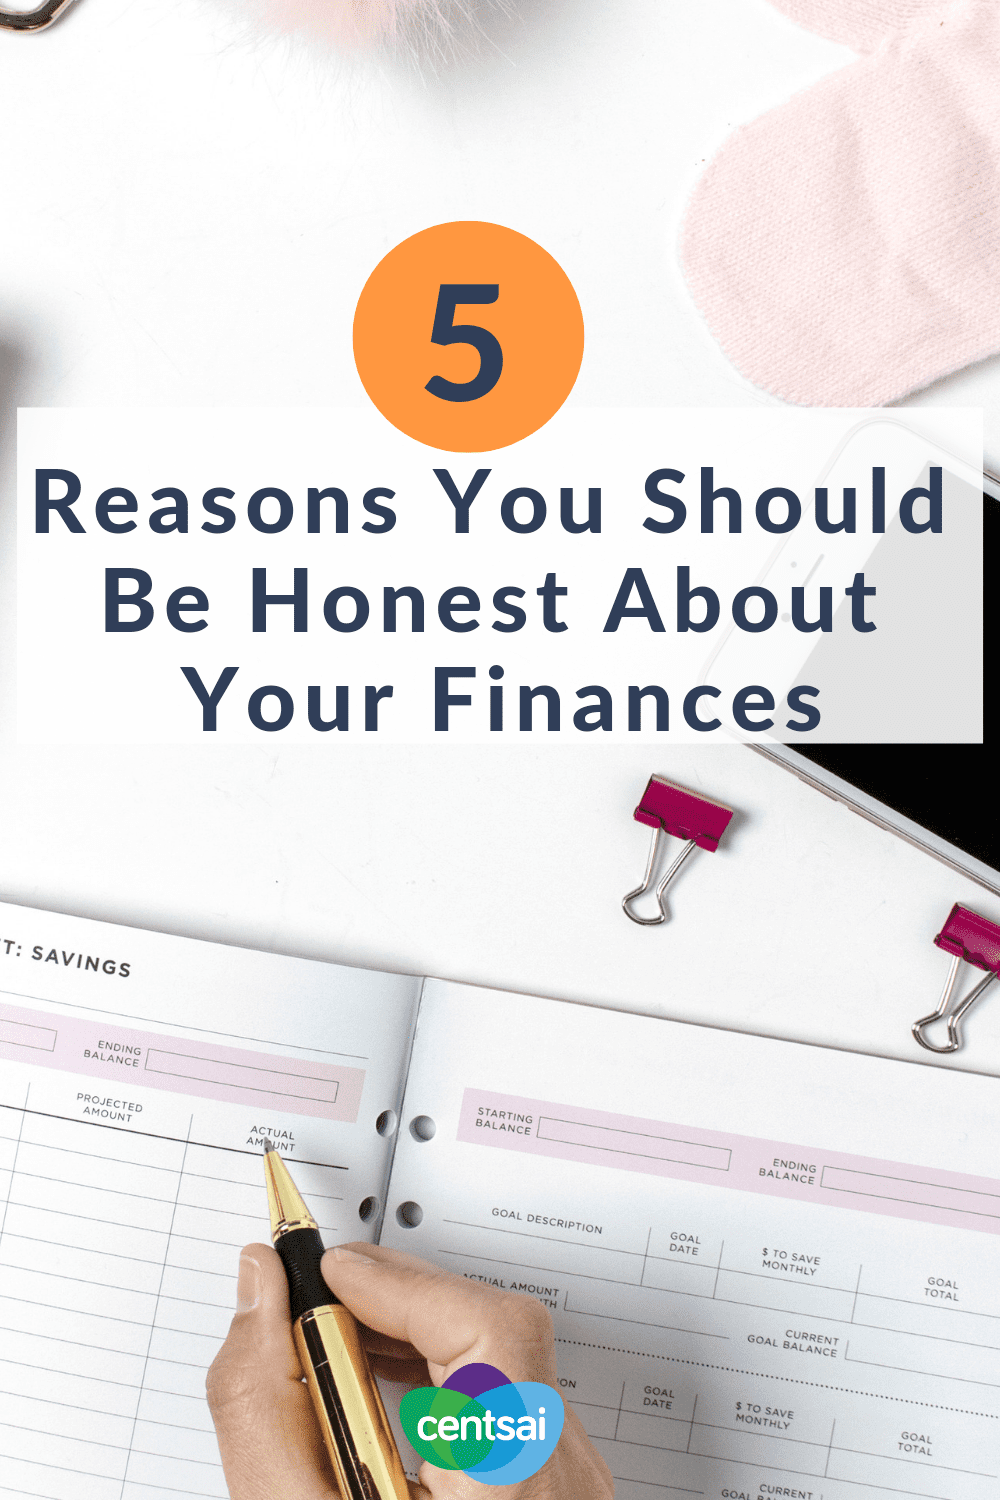 5 Reasons You Should Be Honest About Your Finances. Everybody says it: Don't compare yourself to others. But it's easier said than done. Learn why and how to avoid keeping up with the Joneses. #finances #personalfinance #money #frugaltips